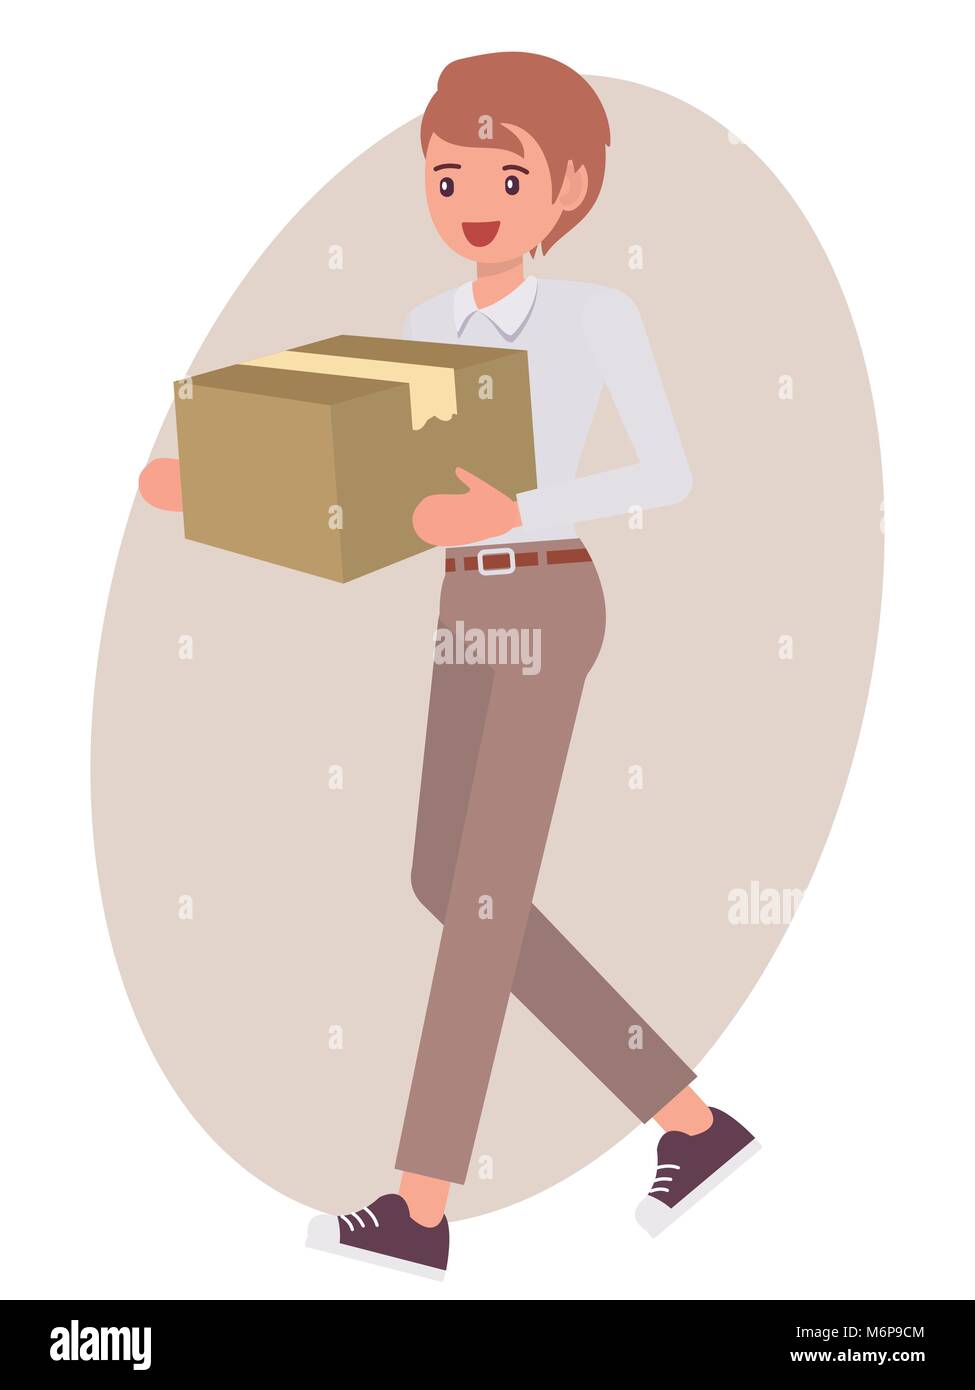 Cartoon character design male man carry paper box Stock Vector